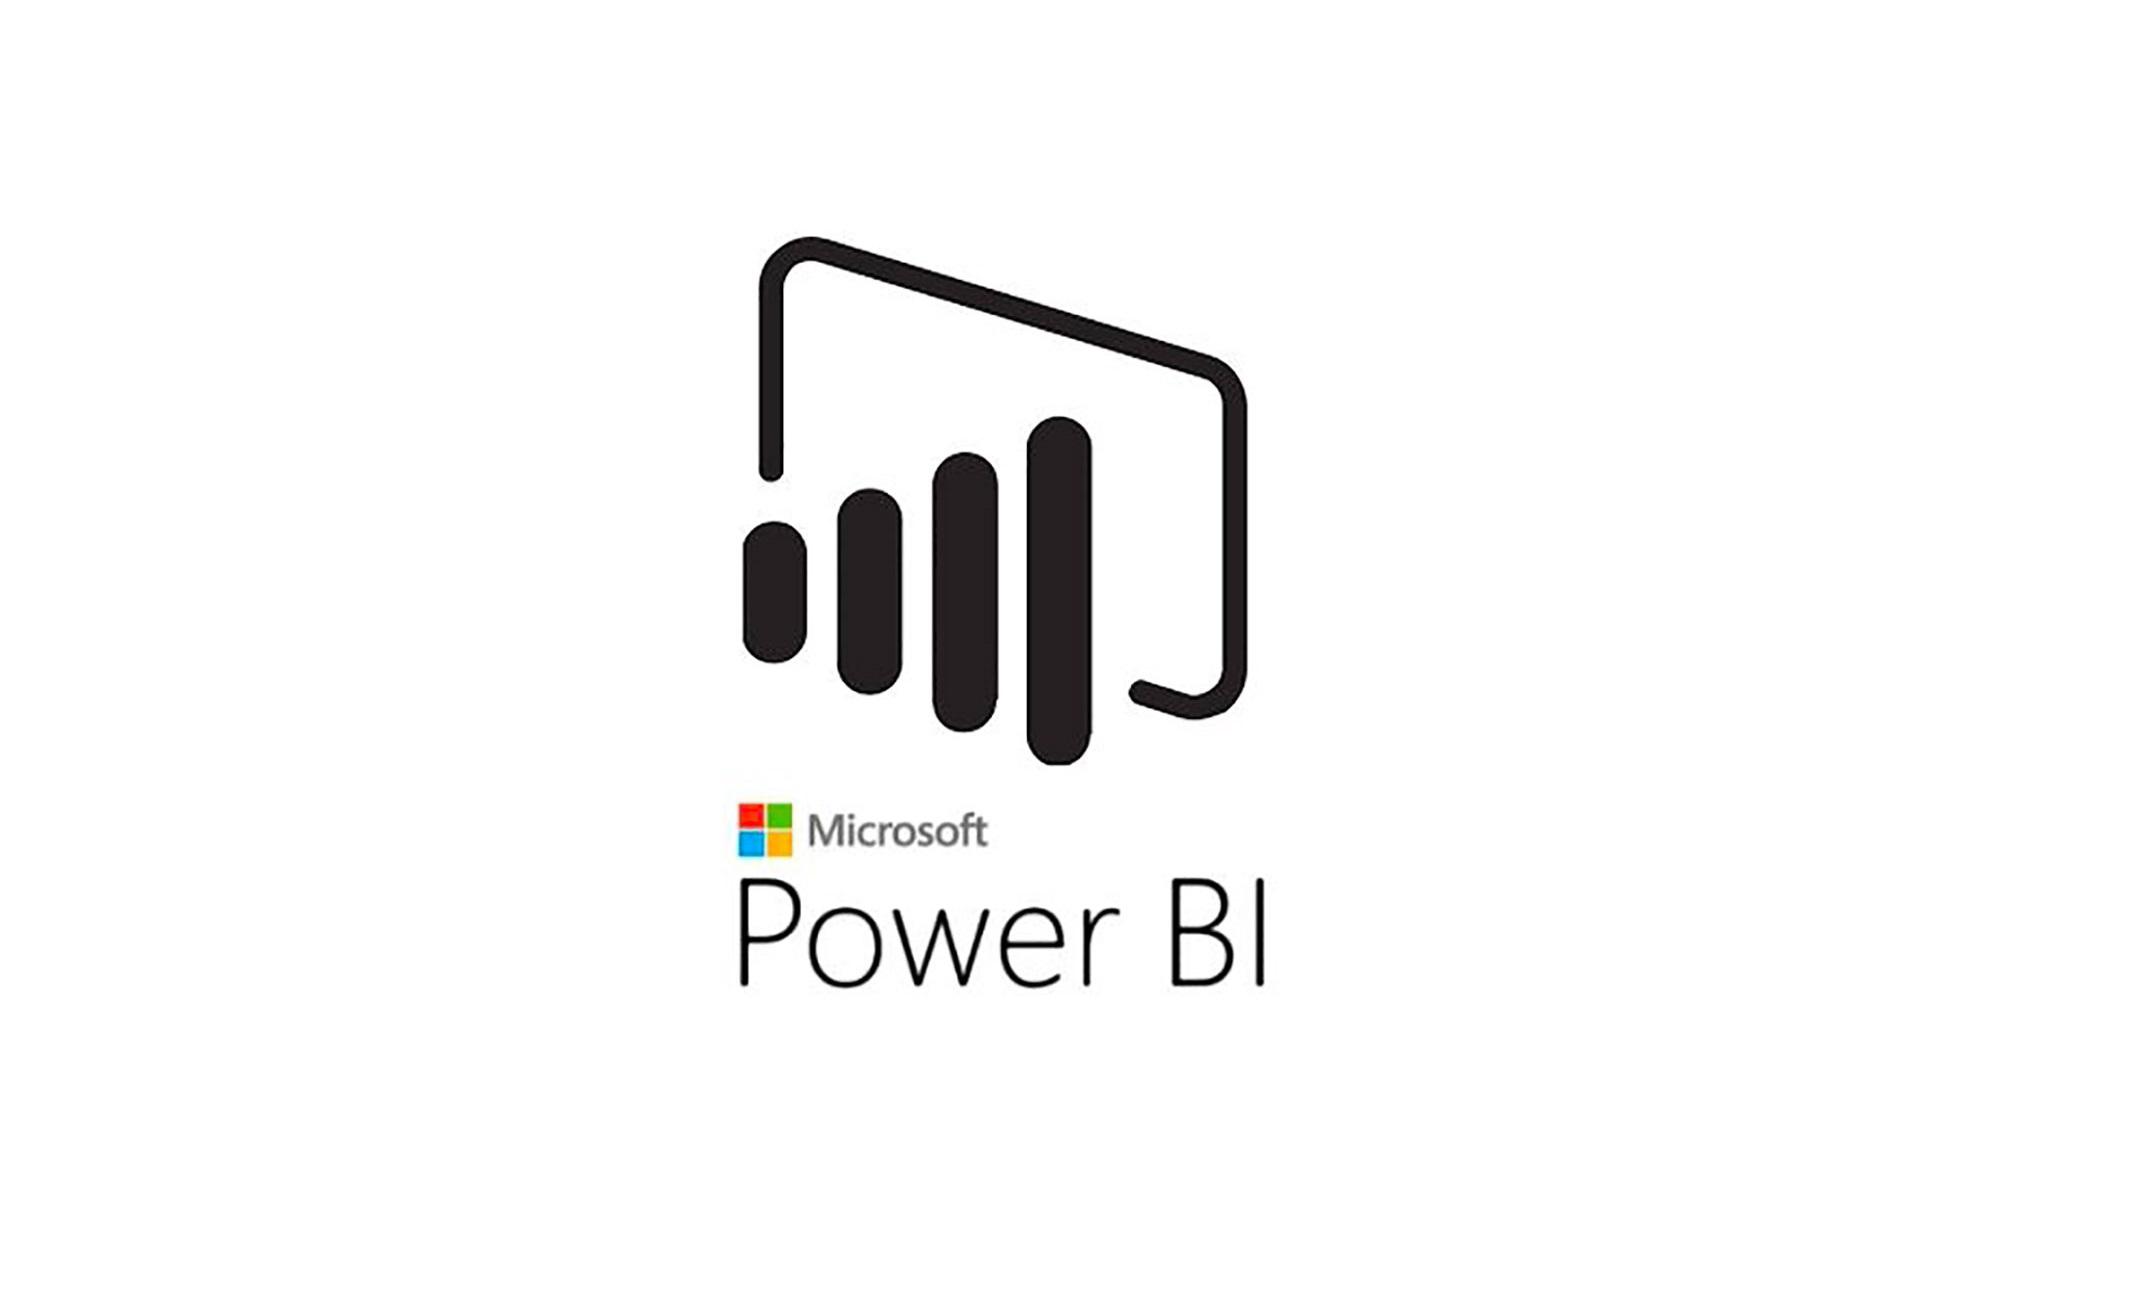 Microsoft Power BI Training in San Jose | Introduction to Power BI training for beginners | Getting started with Power BI | What is Power BI | January 20, 2020 - February 12, 2020